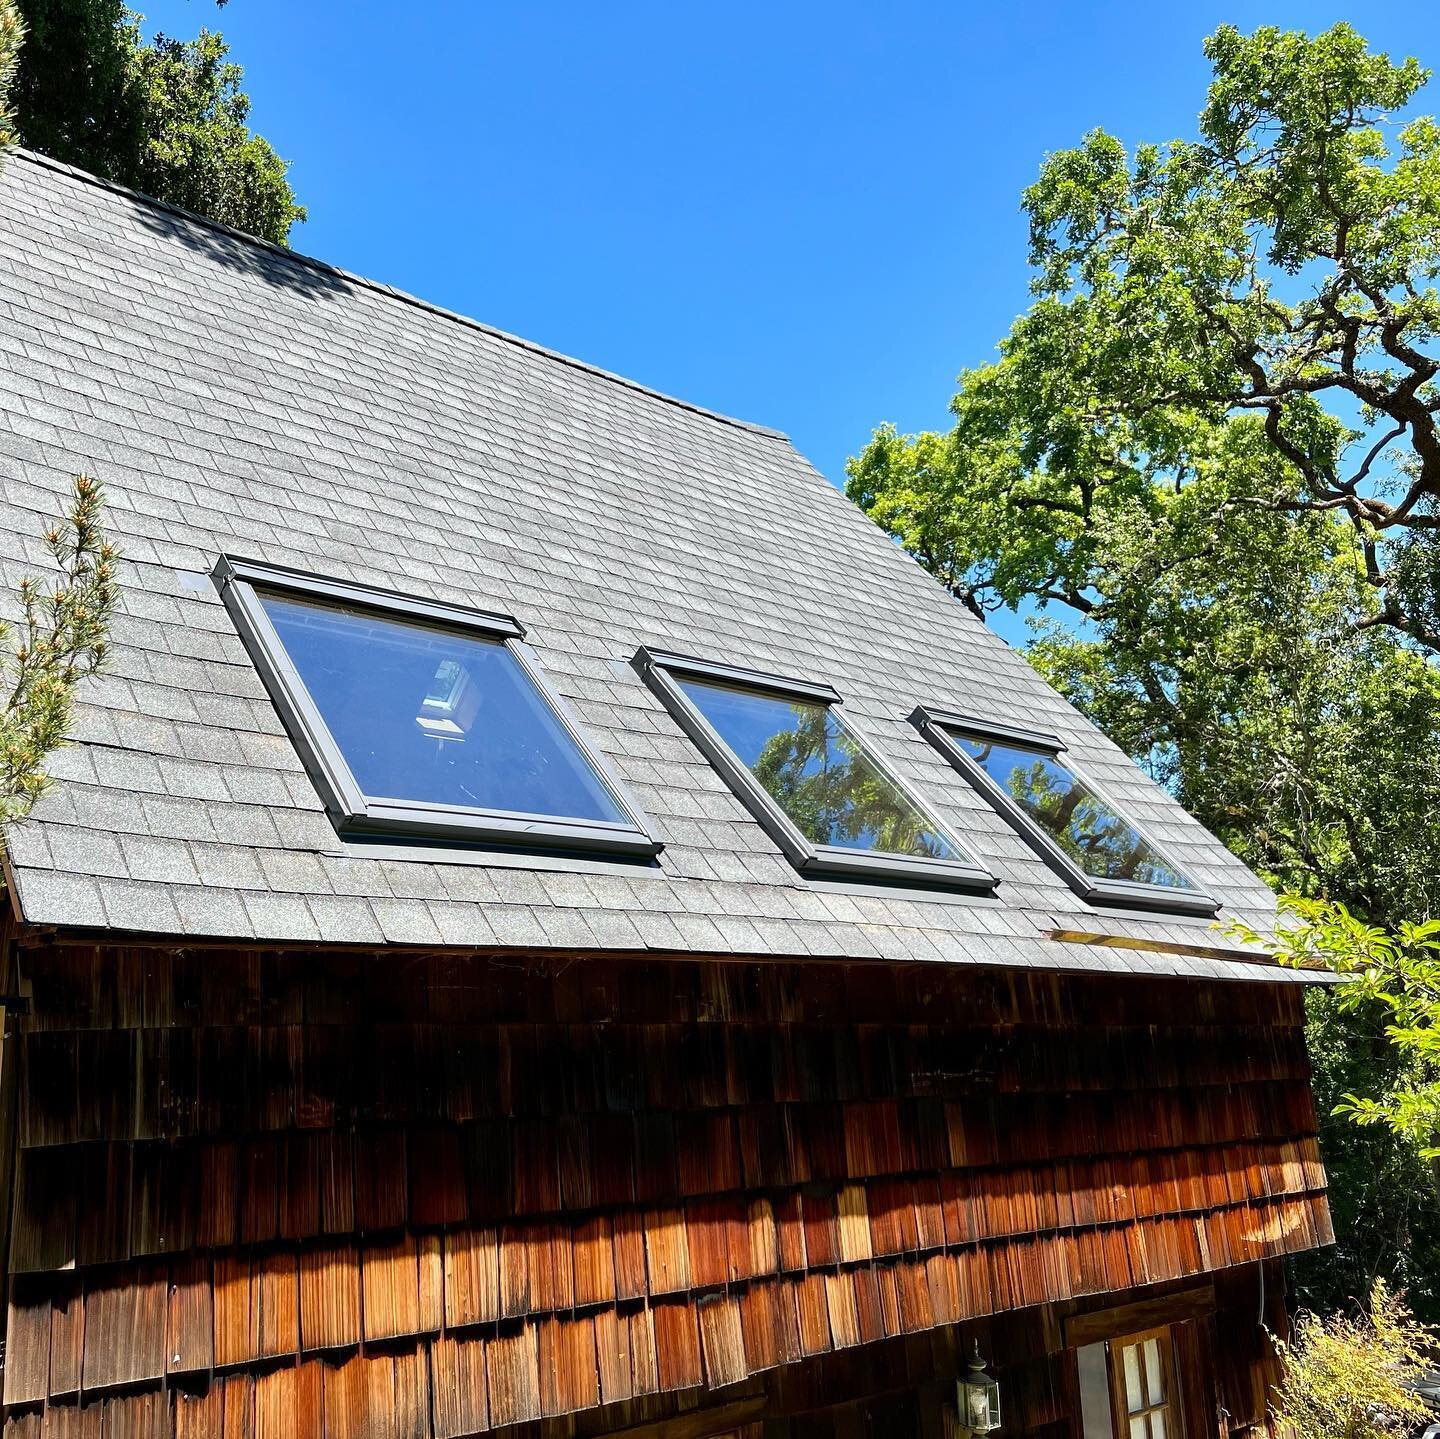 Roof continued&hellip; south side.
.
#roofing 
#roofingcontractor 
#roofinglife 
#roofingcompany 
#roofingcontractors 
@gafroofing 
#gaf 
#gafroofing 
#velux 
#veluxskylights 
@velux 
@veluxusa 
#saltbox 
#saltboxhouse 
#saltboxhome 
#capecodstyle 
#